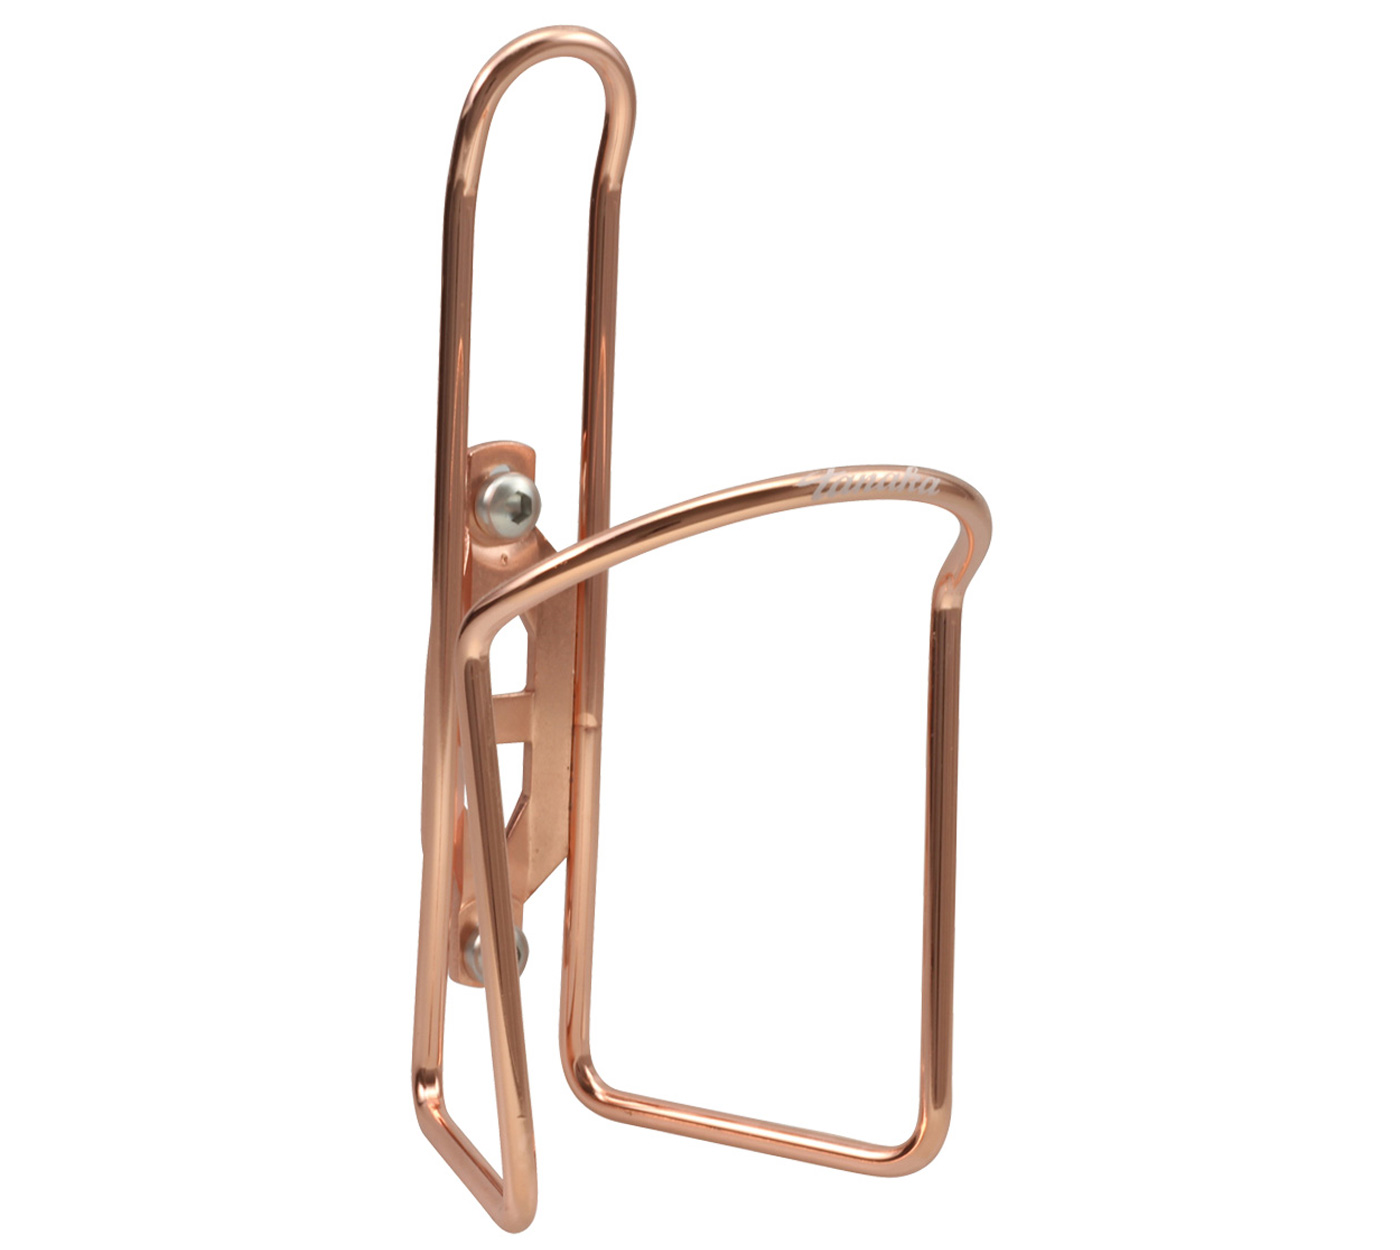 Made in Japan Tanaka Copper Finish Alloy Bicycle Water Bottle Cage 44g